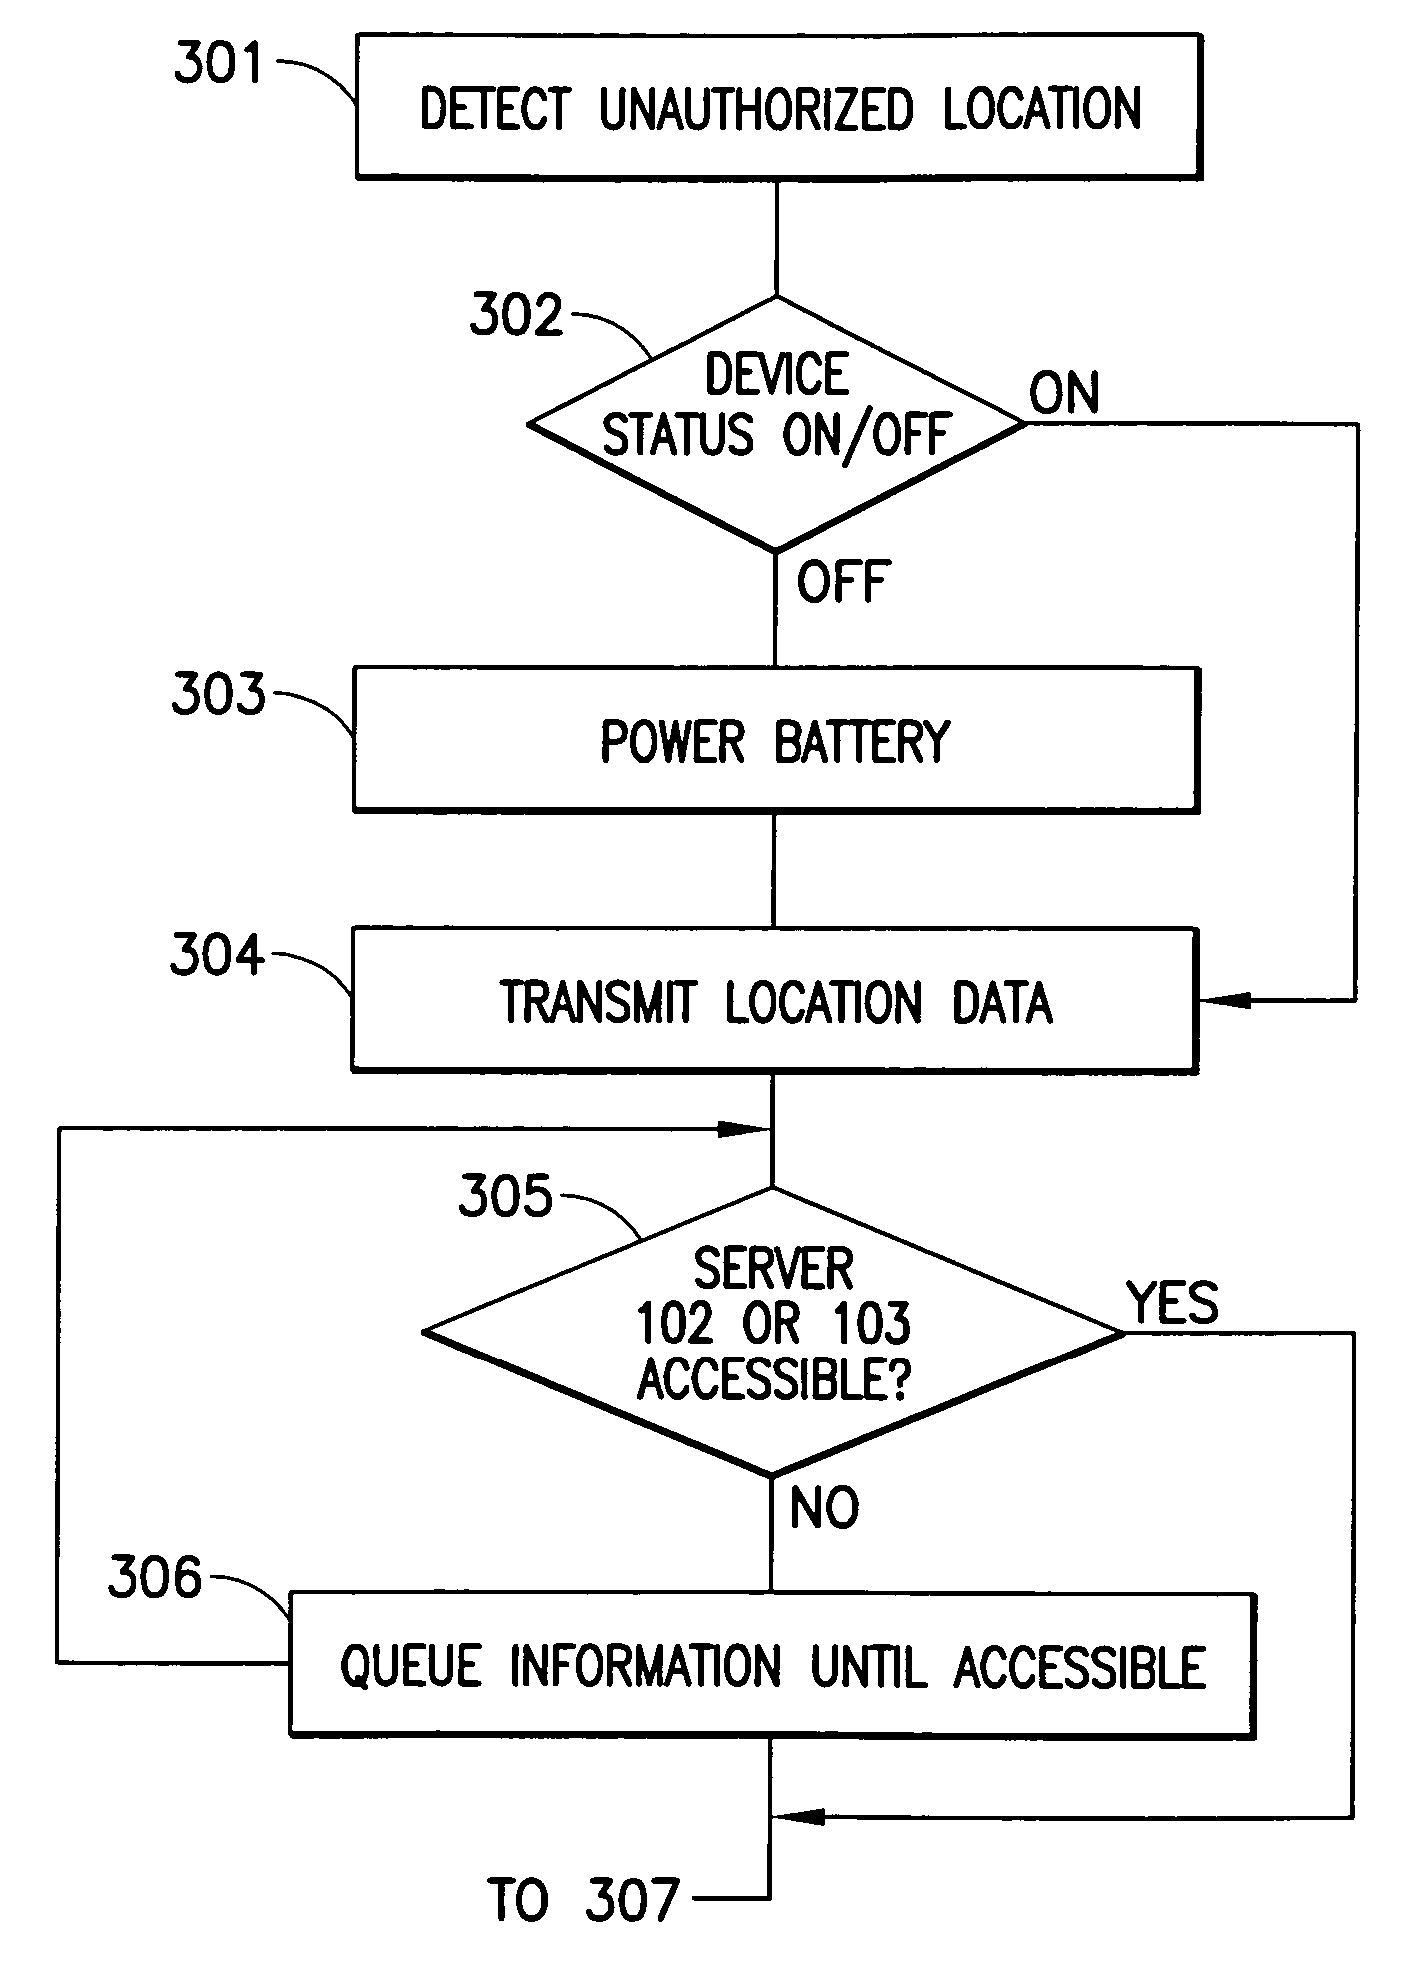 Protection of information in computing devices